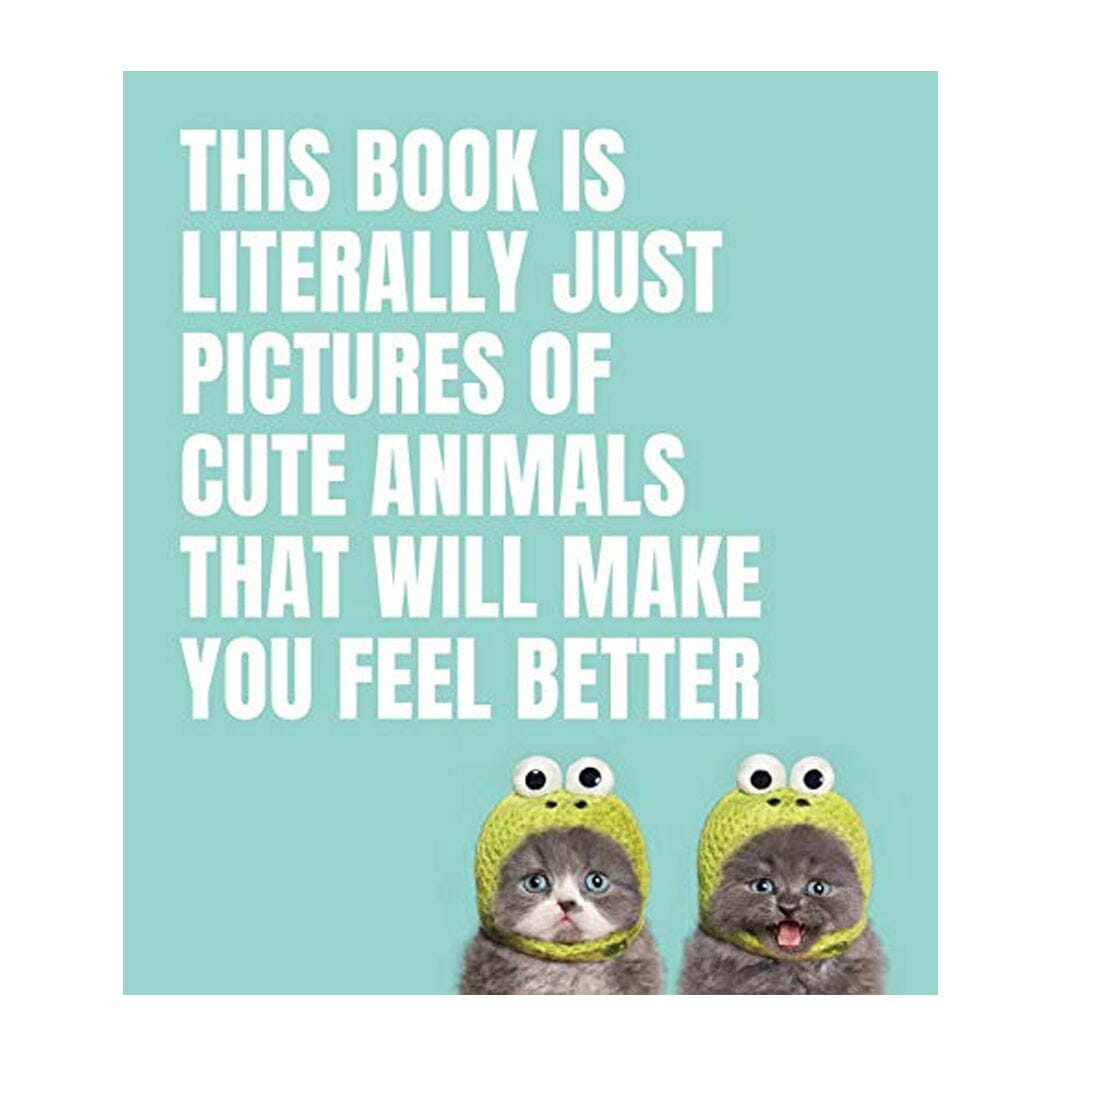 This Book is Just Literally Pictures of Cute Animals